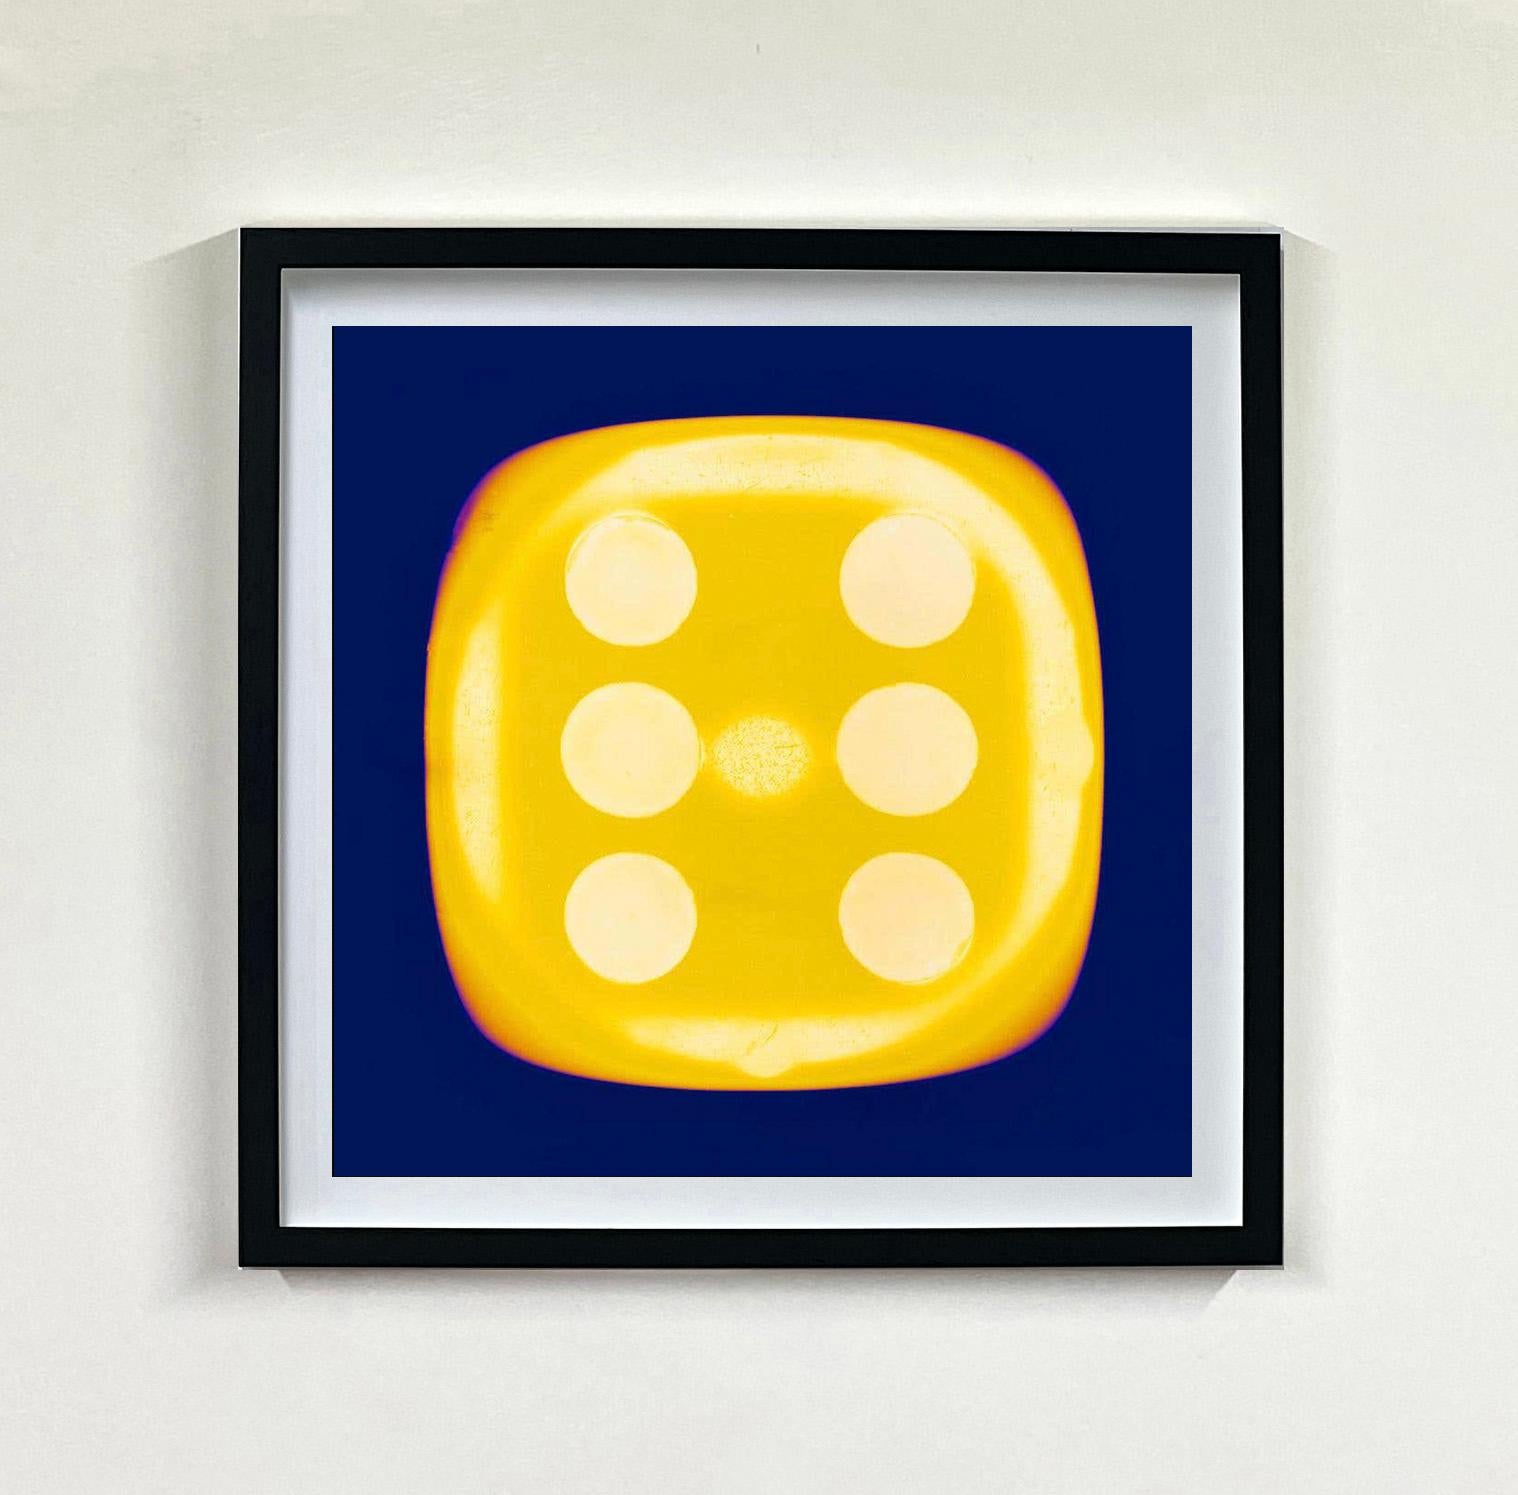 A yellow dice suspended on an inky blue background, hypnotically curious in both content and technique, viewers find themselves pleasantly puzzled. Heidler & Heeps have developed their own dichromatic technique resulting in something, which is